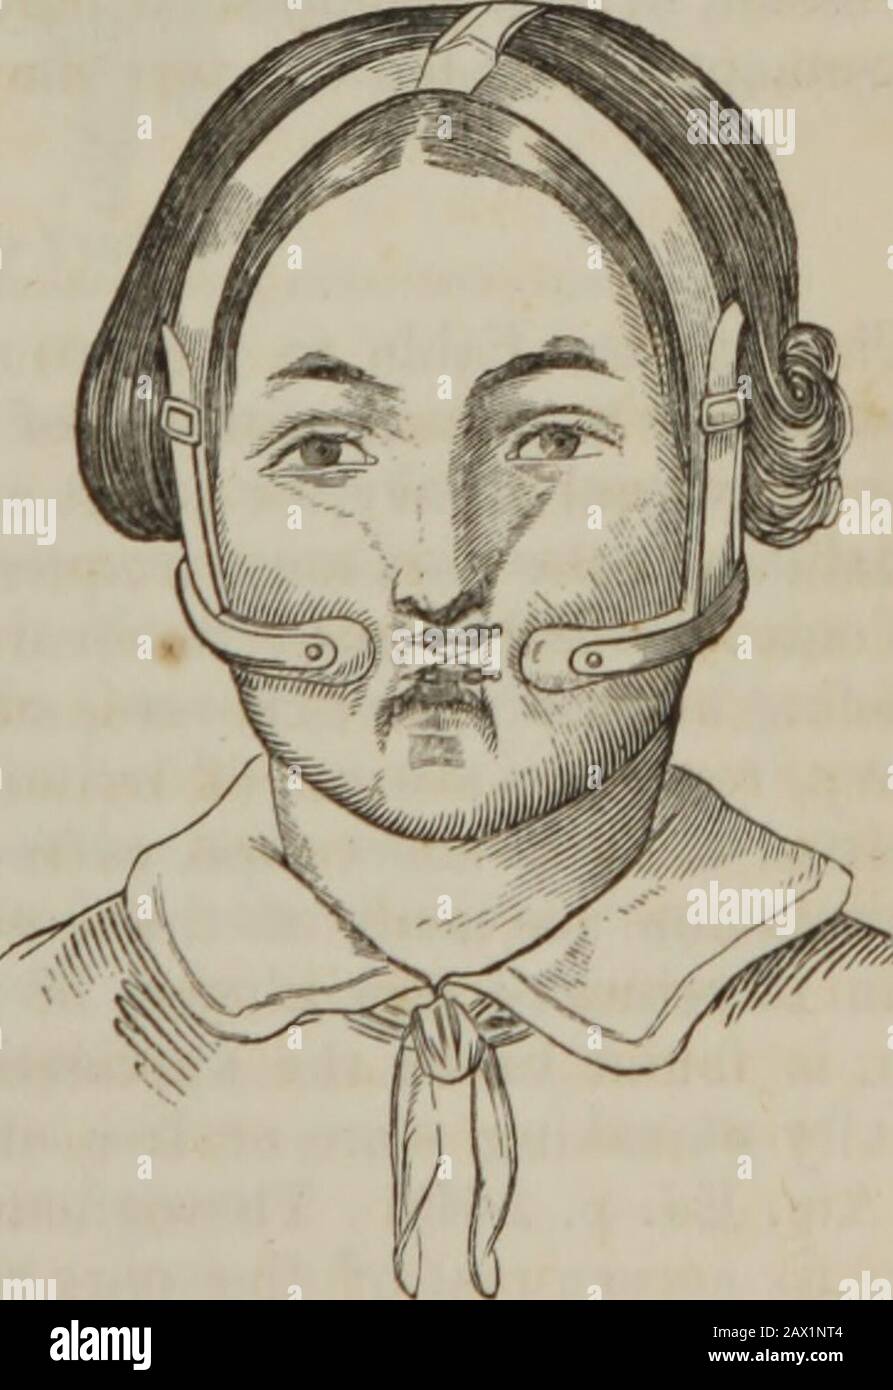 The practice of surgery . edundancy should be found, after .cicatrization, it may easilybe reduced to the proper outline, by knife or scissors if need be; but Fig. 76. in general, absorption will render.all secondary interference unneces-sary. [In the last edition of his Prac-tical Surgery (Am. Reprint, 1853),Mr. Fergusson speaks very highlyof an apparatus which he almostconstantly employs, to assist theaction of the sutures in maintain-ing close apposition of the edgesof the wound. It is composed ofa semicircular spring padded atboth extremities, which are so ap-plied upon the cheeks as to ta Stock Photo